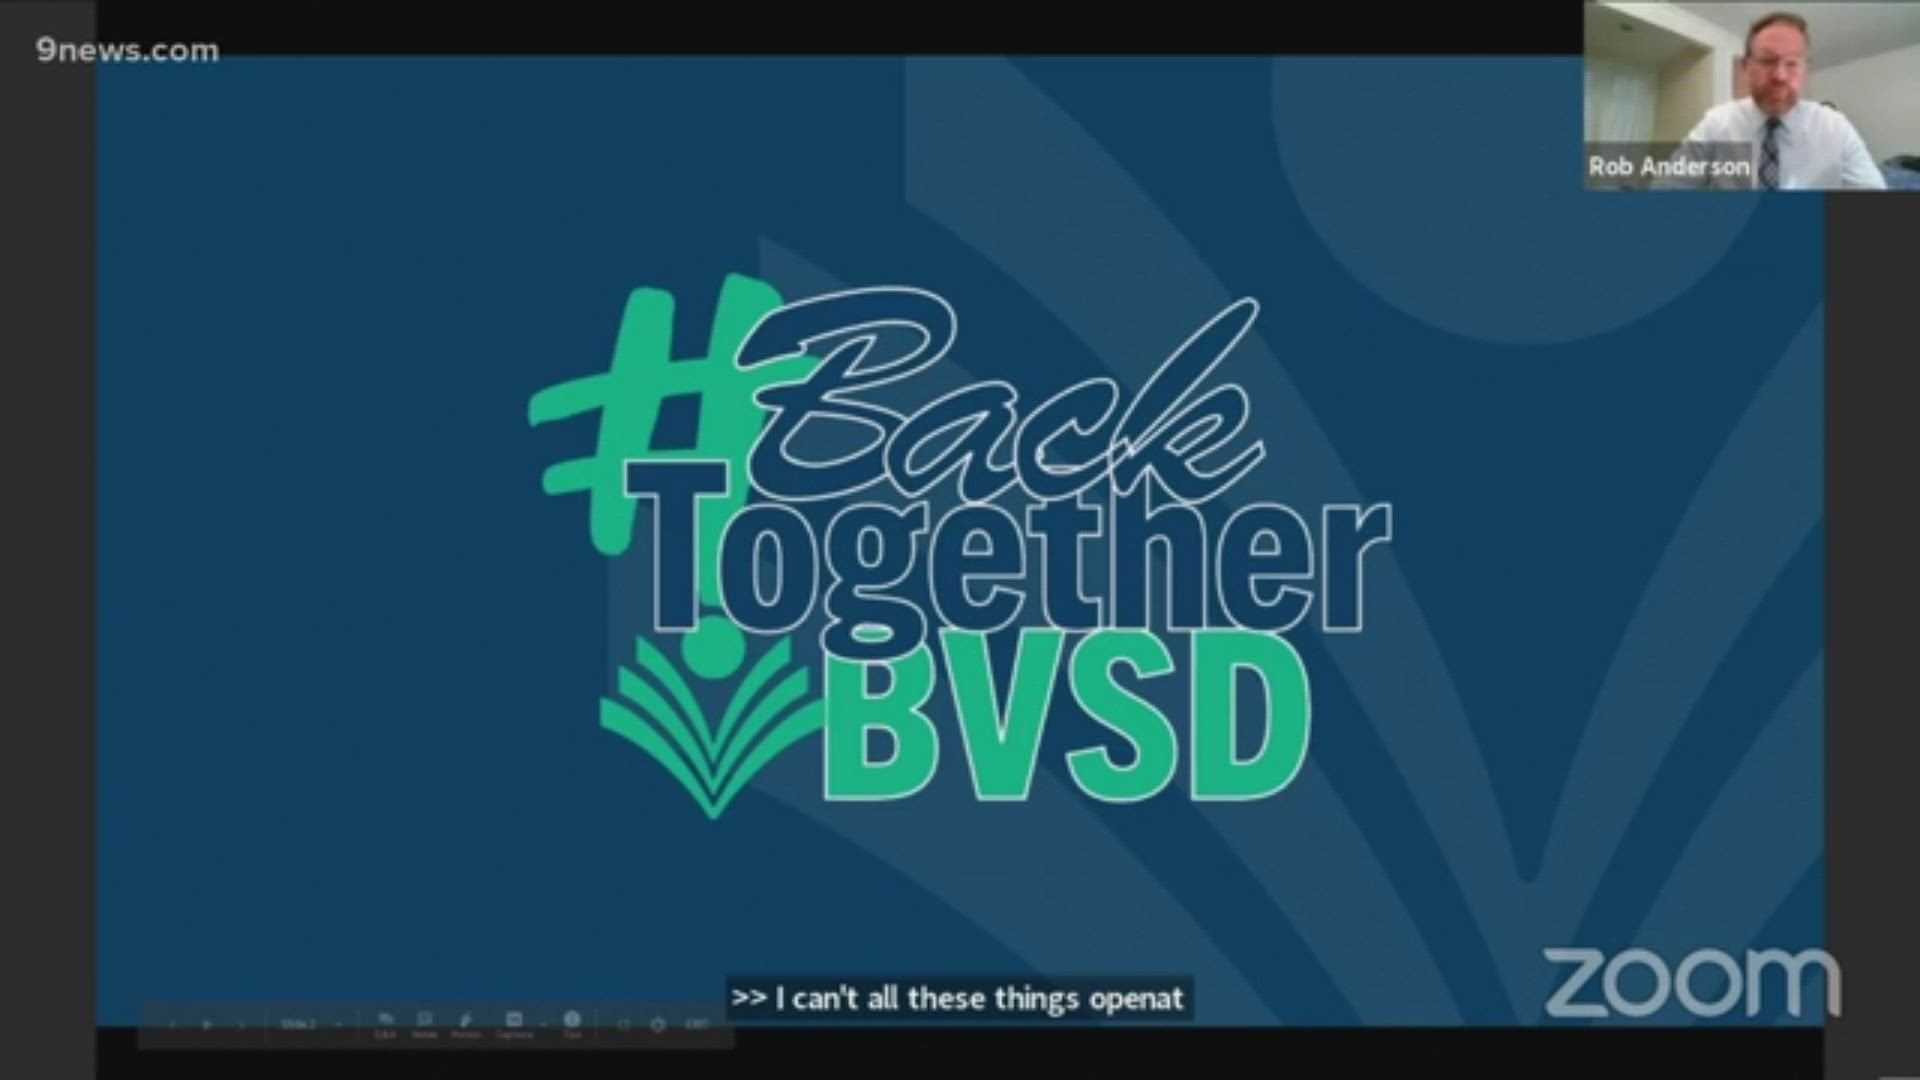 The BVSD said students will be taking online classes two days a week and attending in-person classes two days a week. The fifth day will be a work day.